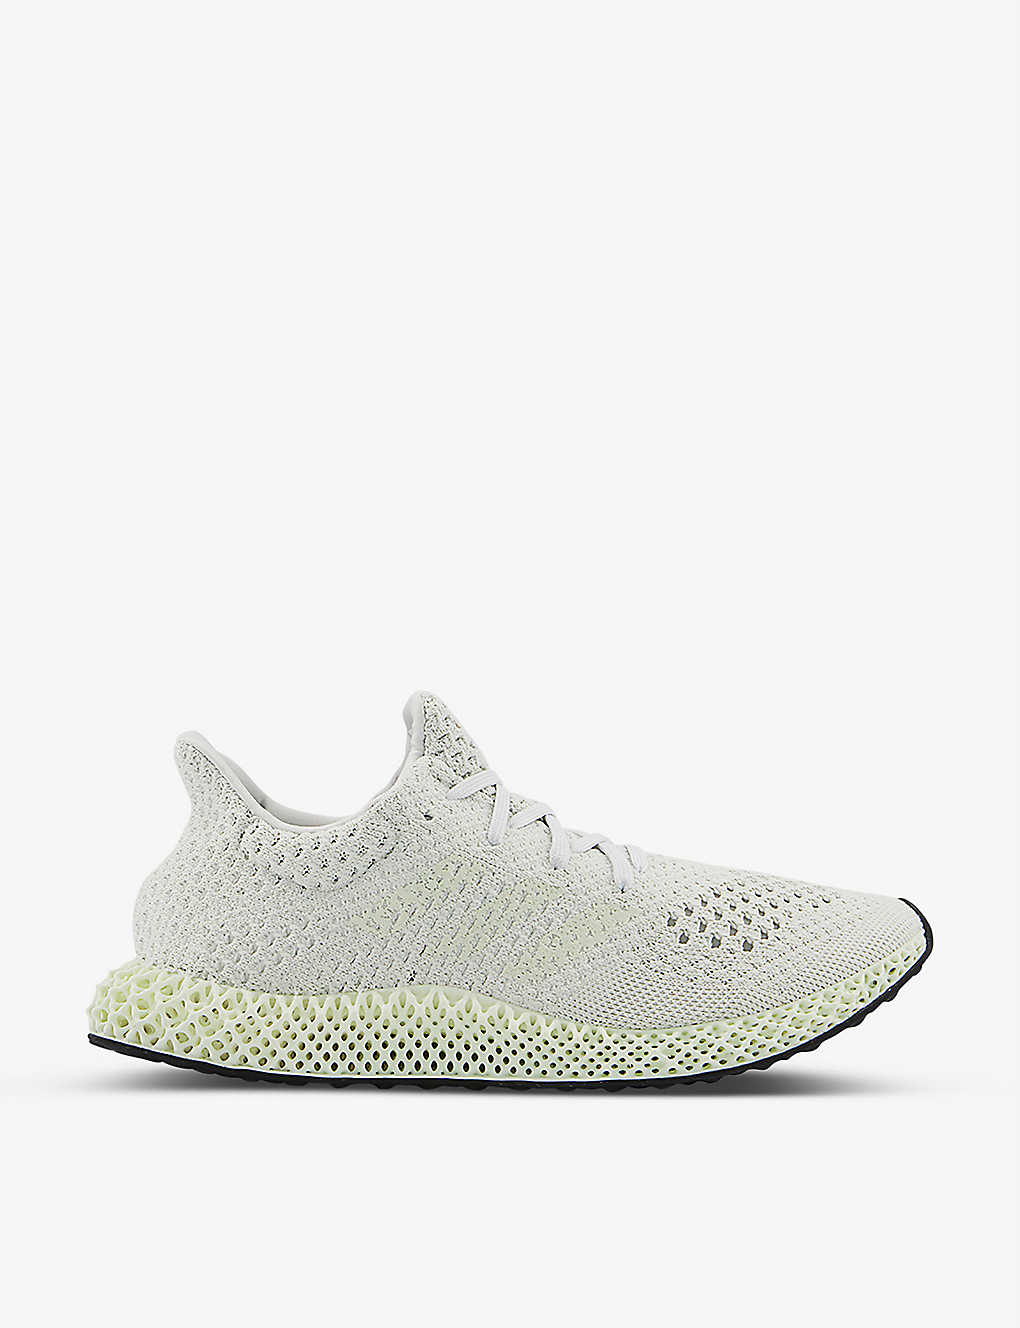 Futurecraft 4D low-top knitted trainers(9424498)